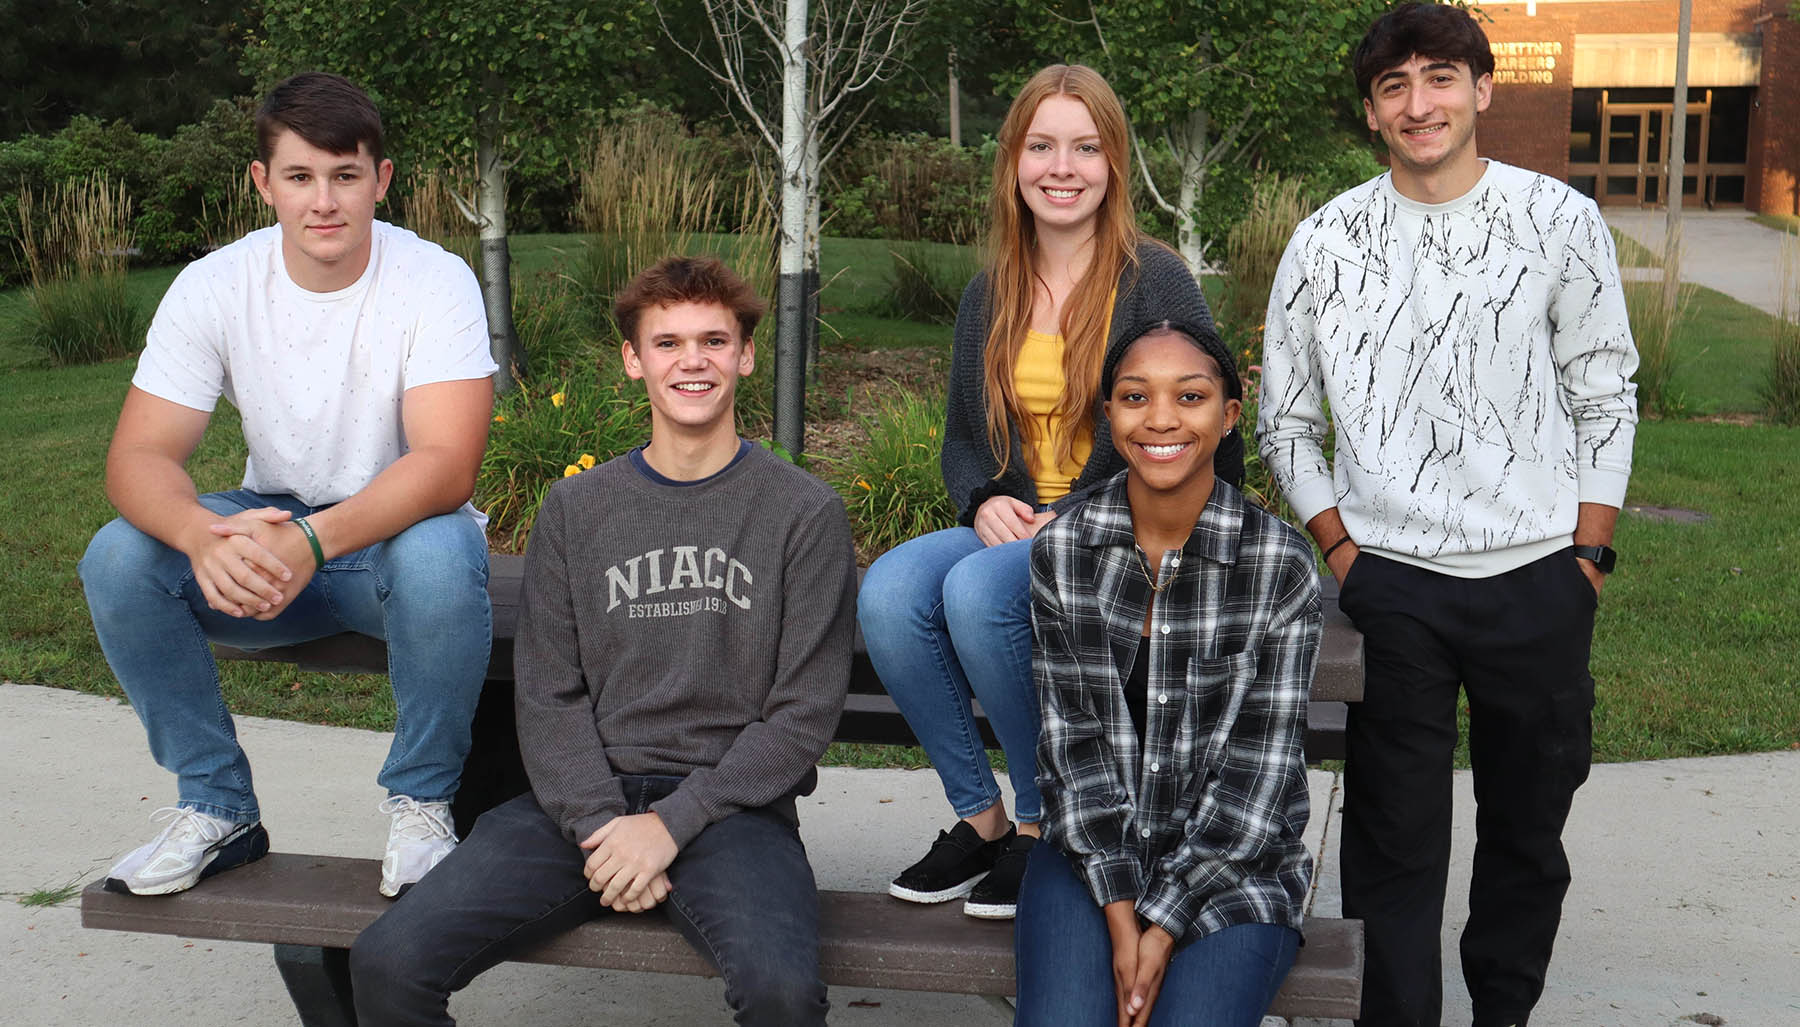 College students smiling while sitting and standing at a picnic bench